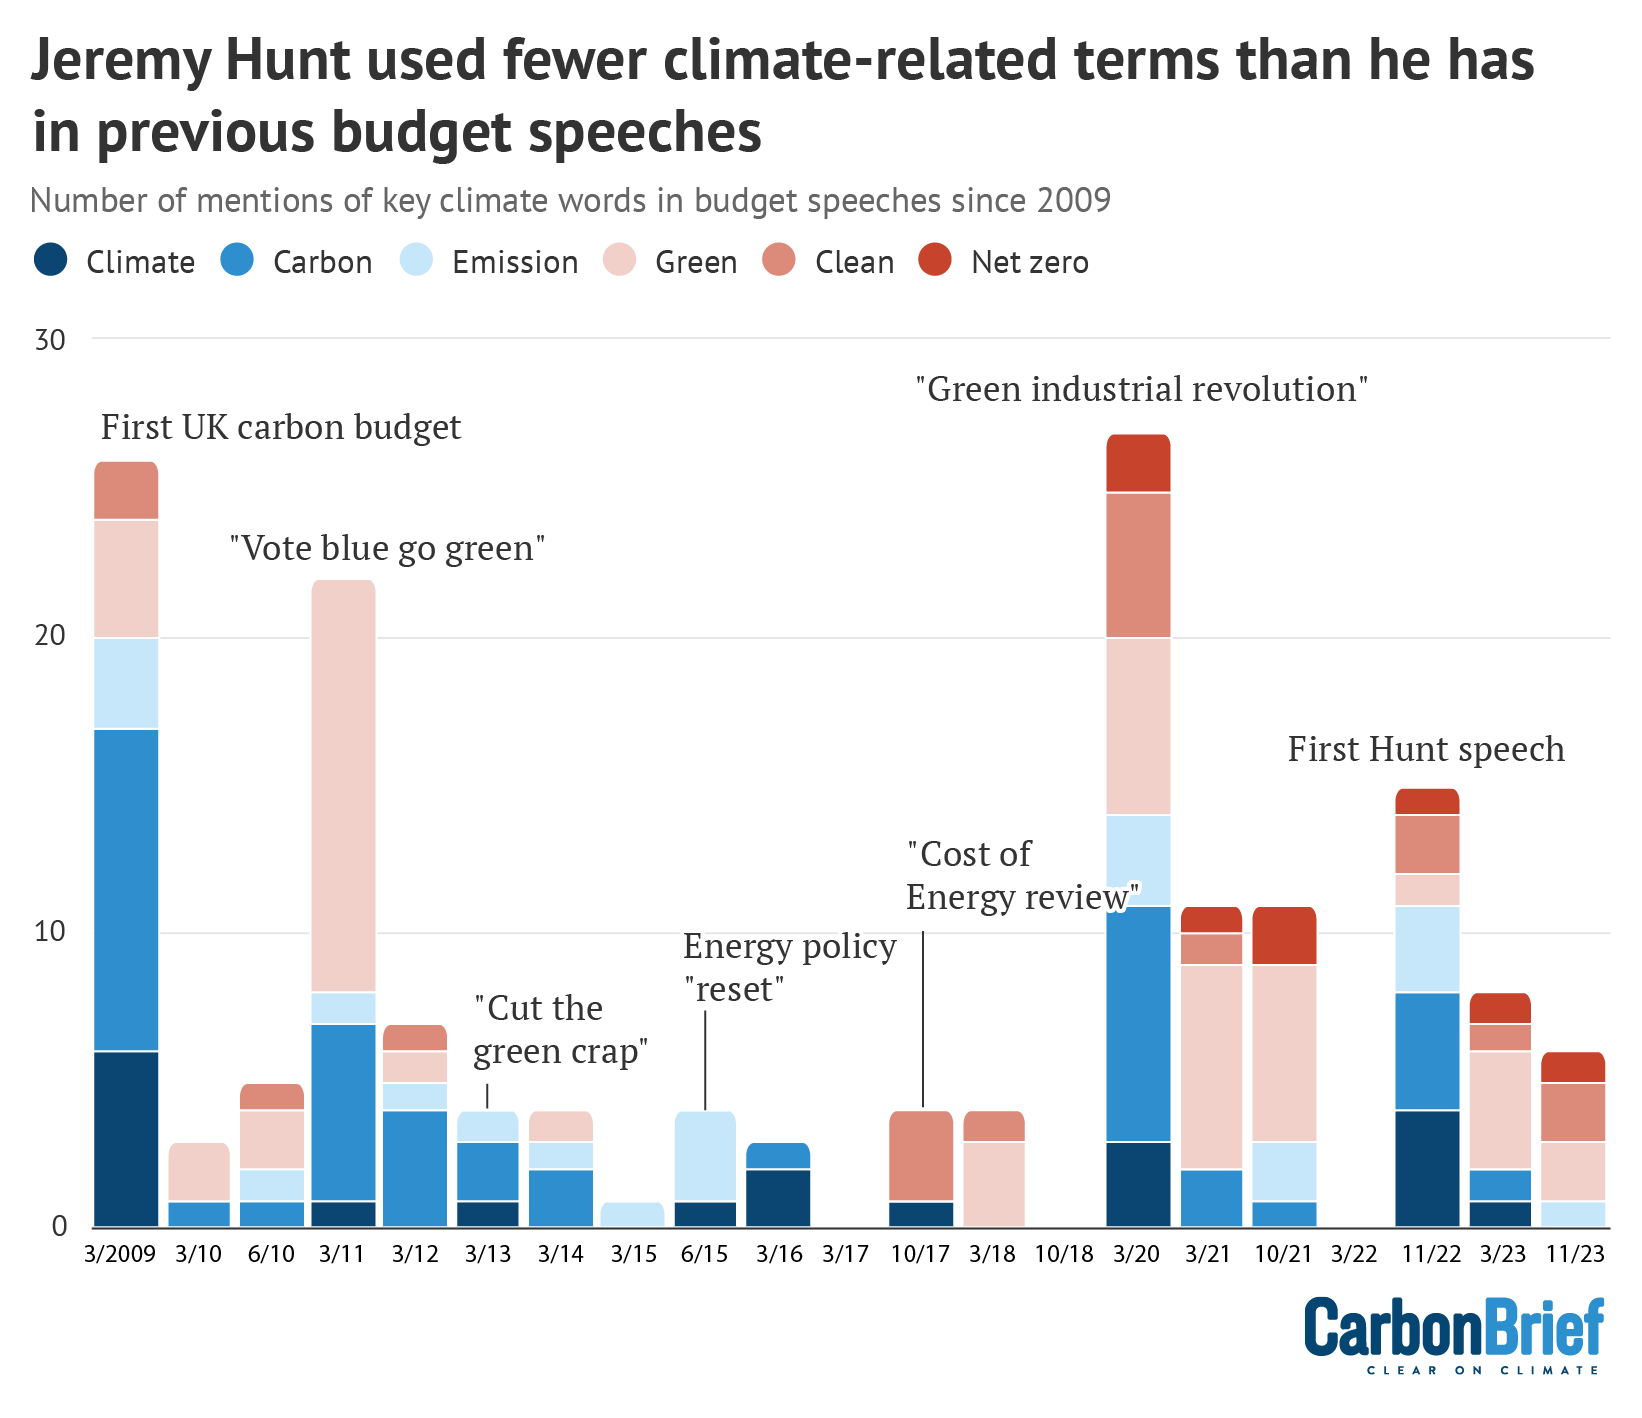 Jeremy Hunt used fewer climate-related terms than he has in previous budget speeches